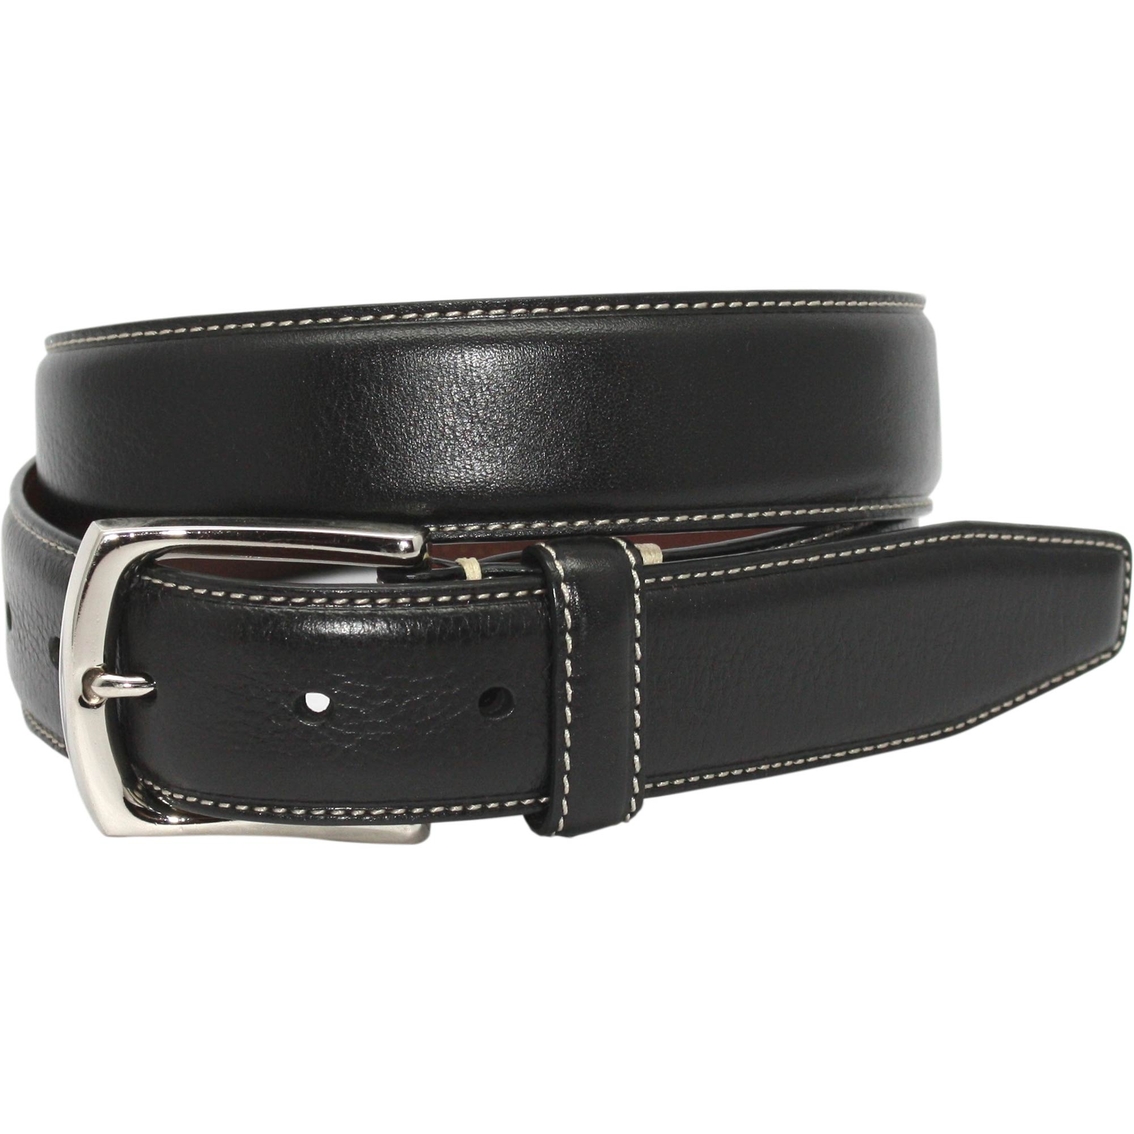 Torino Tumbled Glove Leather Belt | Belts | Clothing & Accessories ...